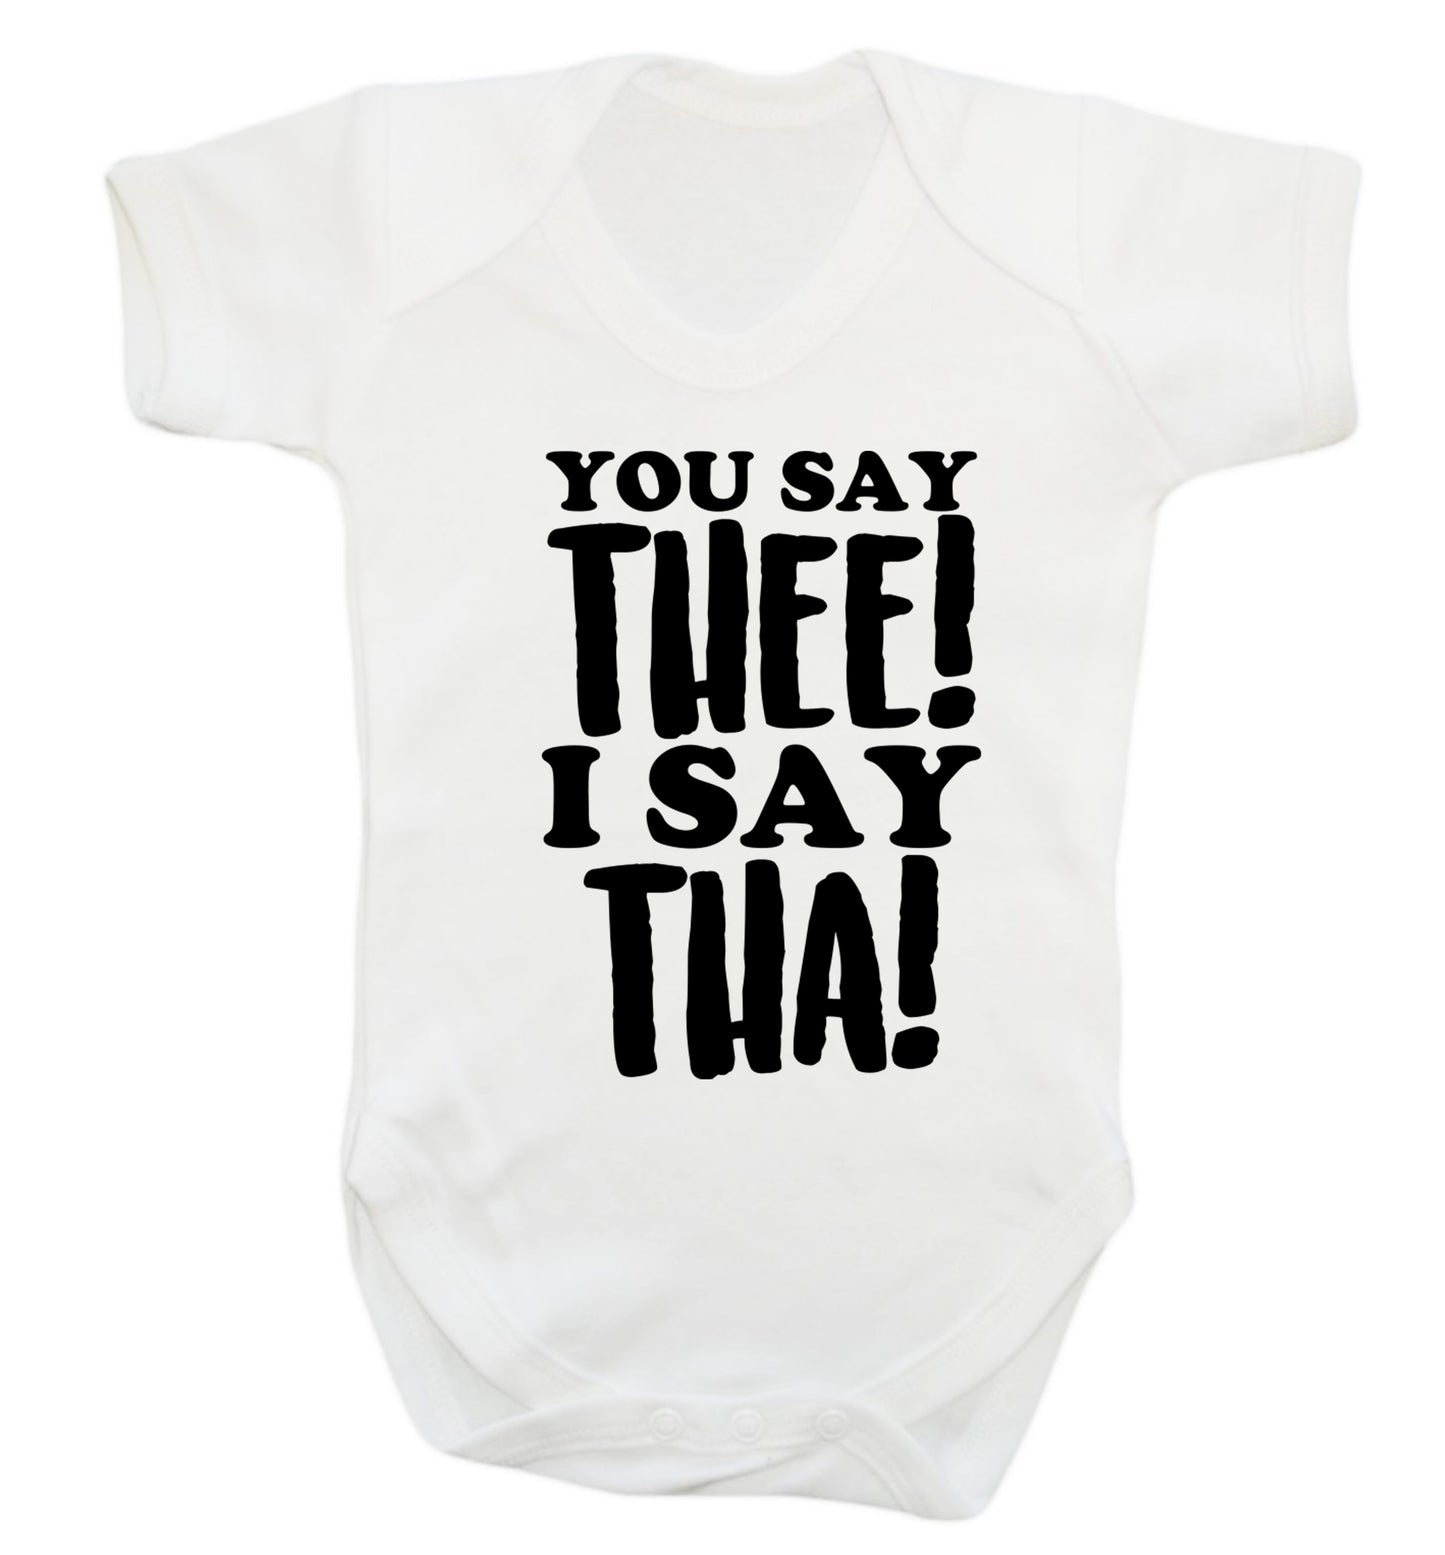 You say thee I say tha Baby Vest white 18-24 months